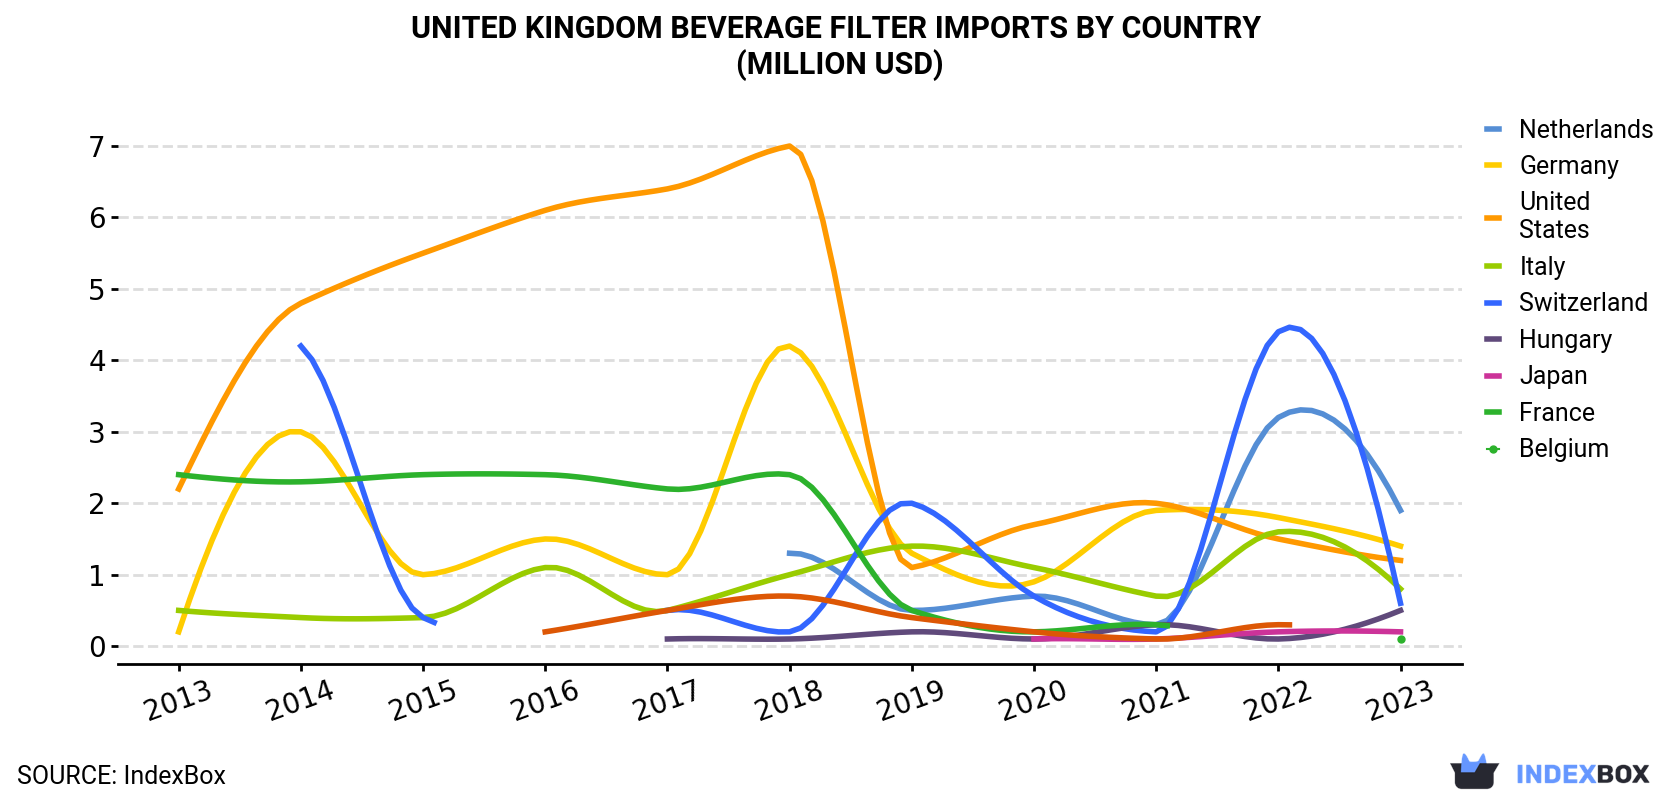 United Kingdom Beverage Filter Imports By Country (Million USD)